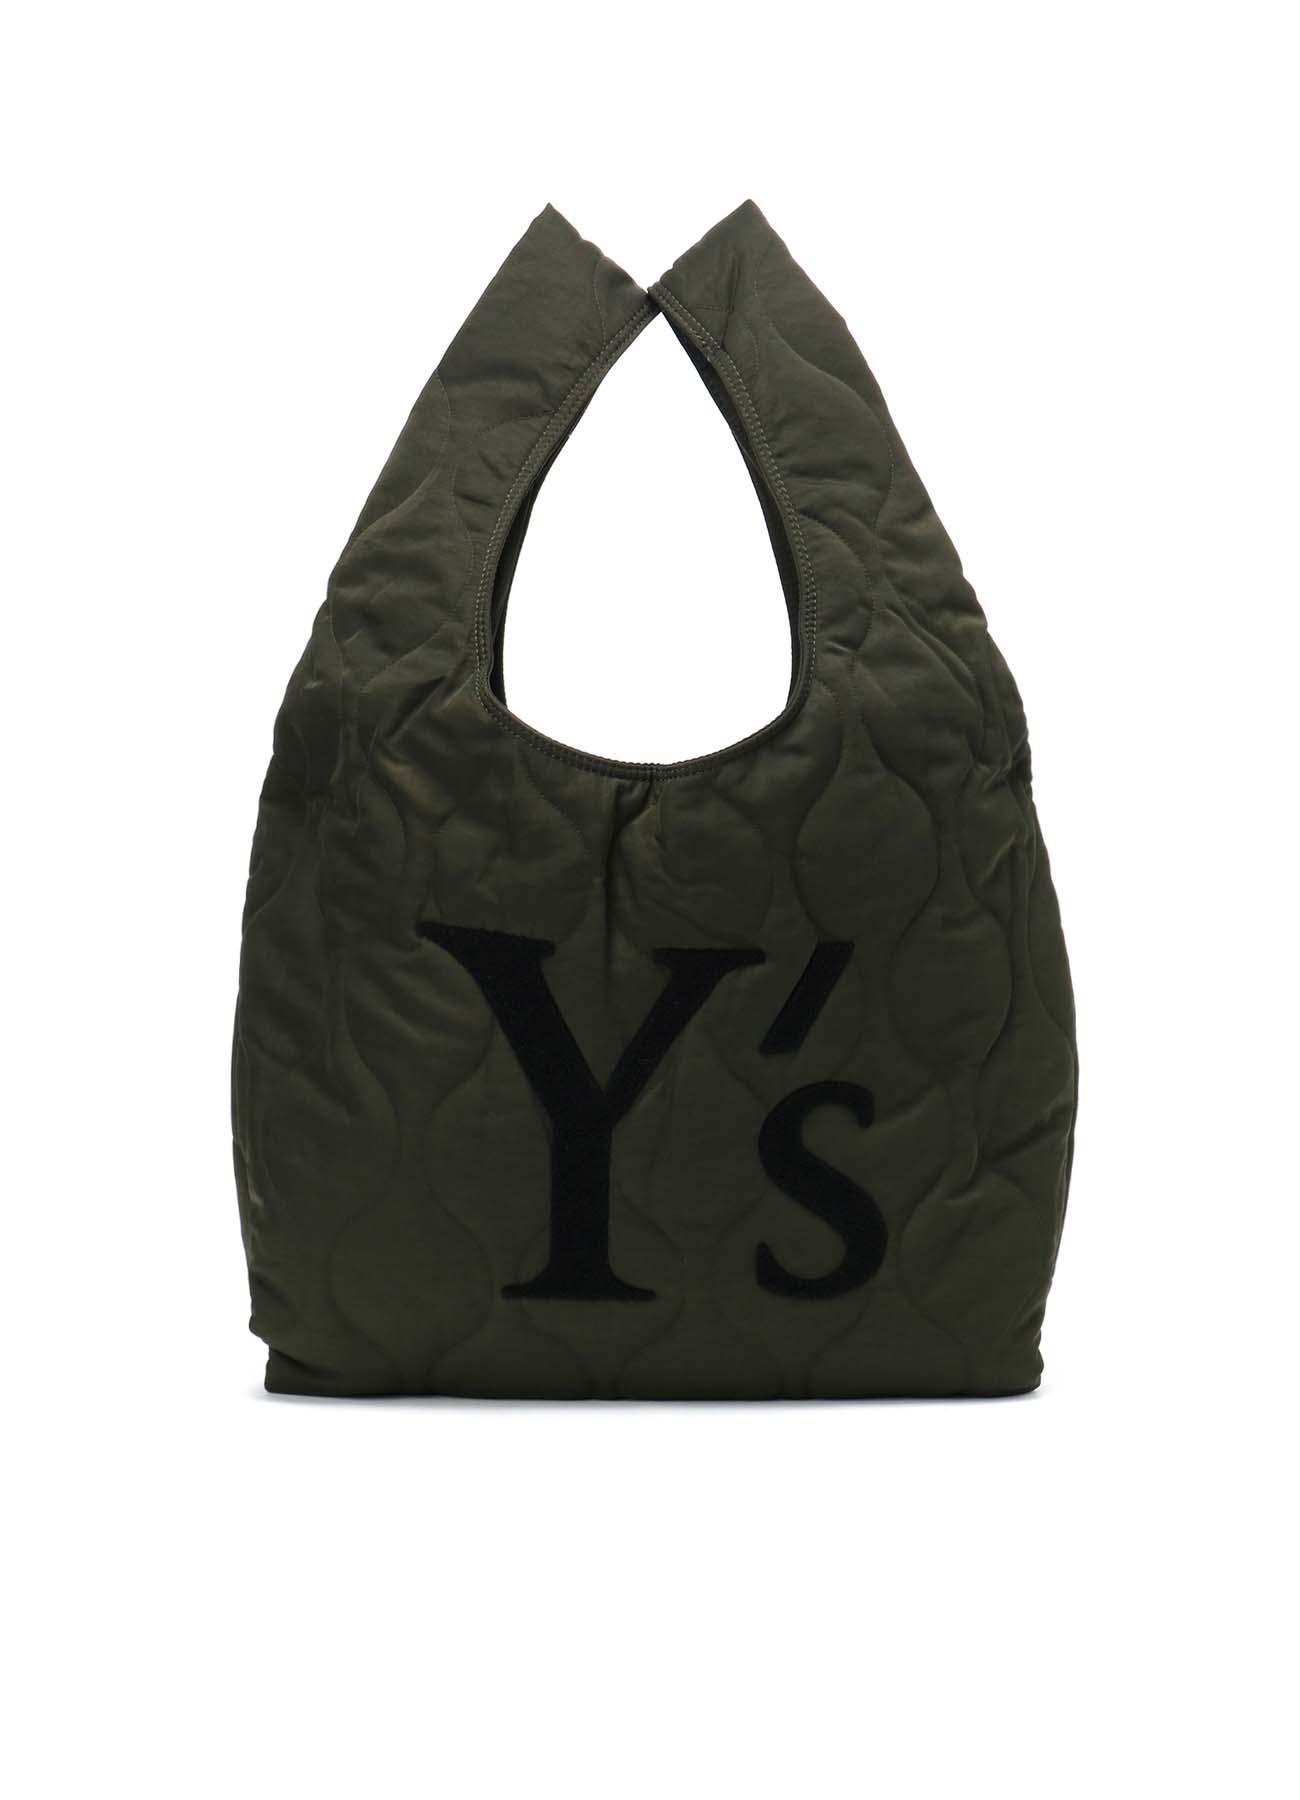 NYLON TWILL QUILT Y's EMBROIDERY BAG